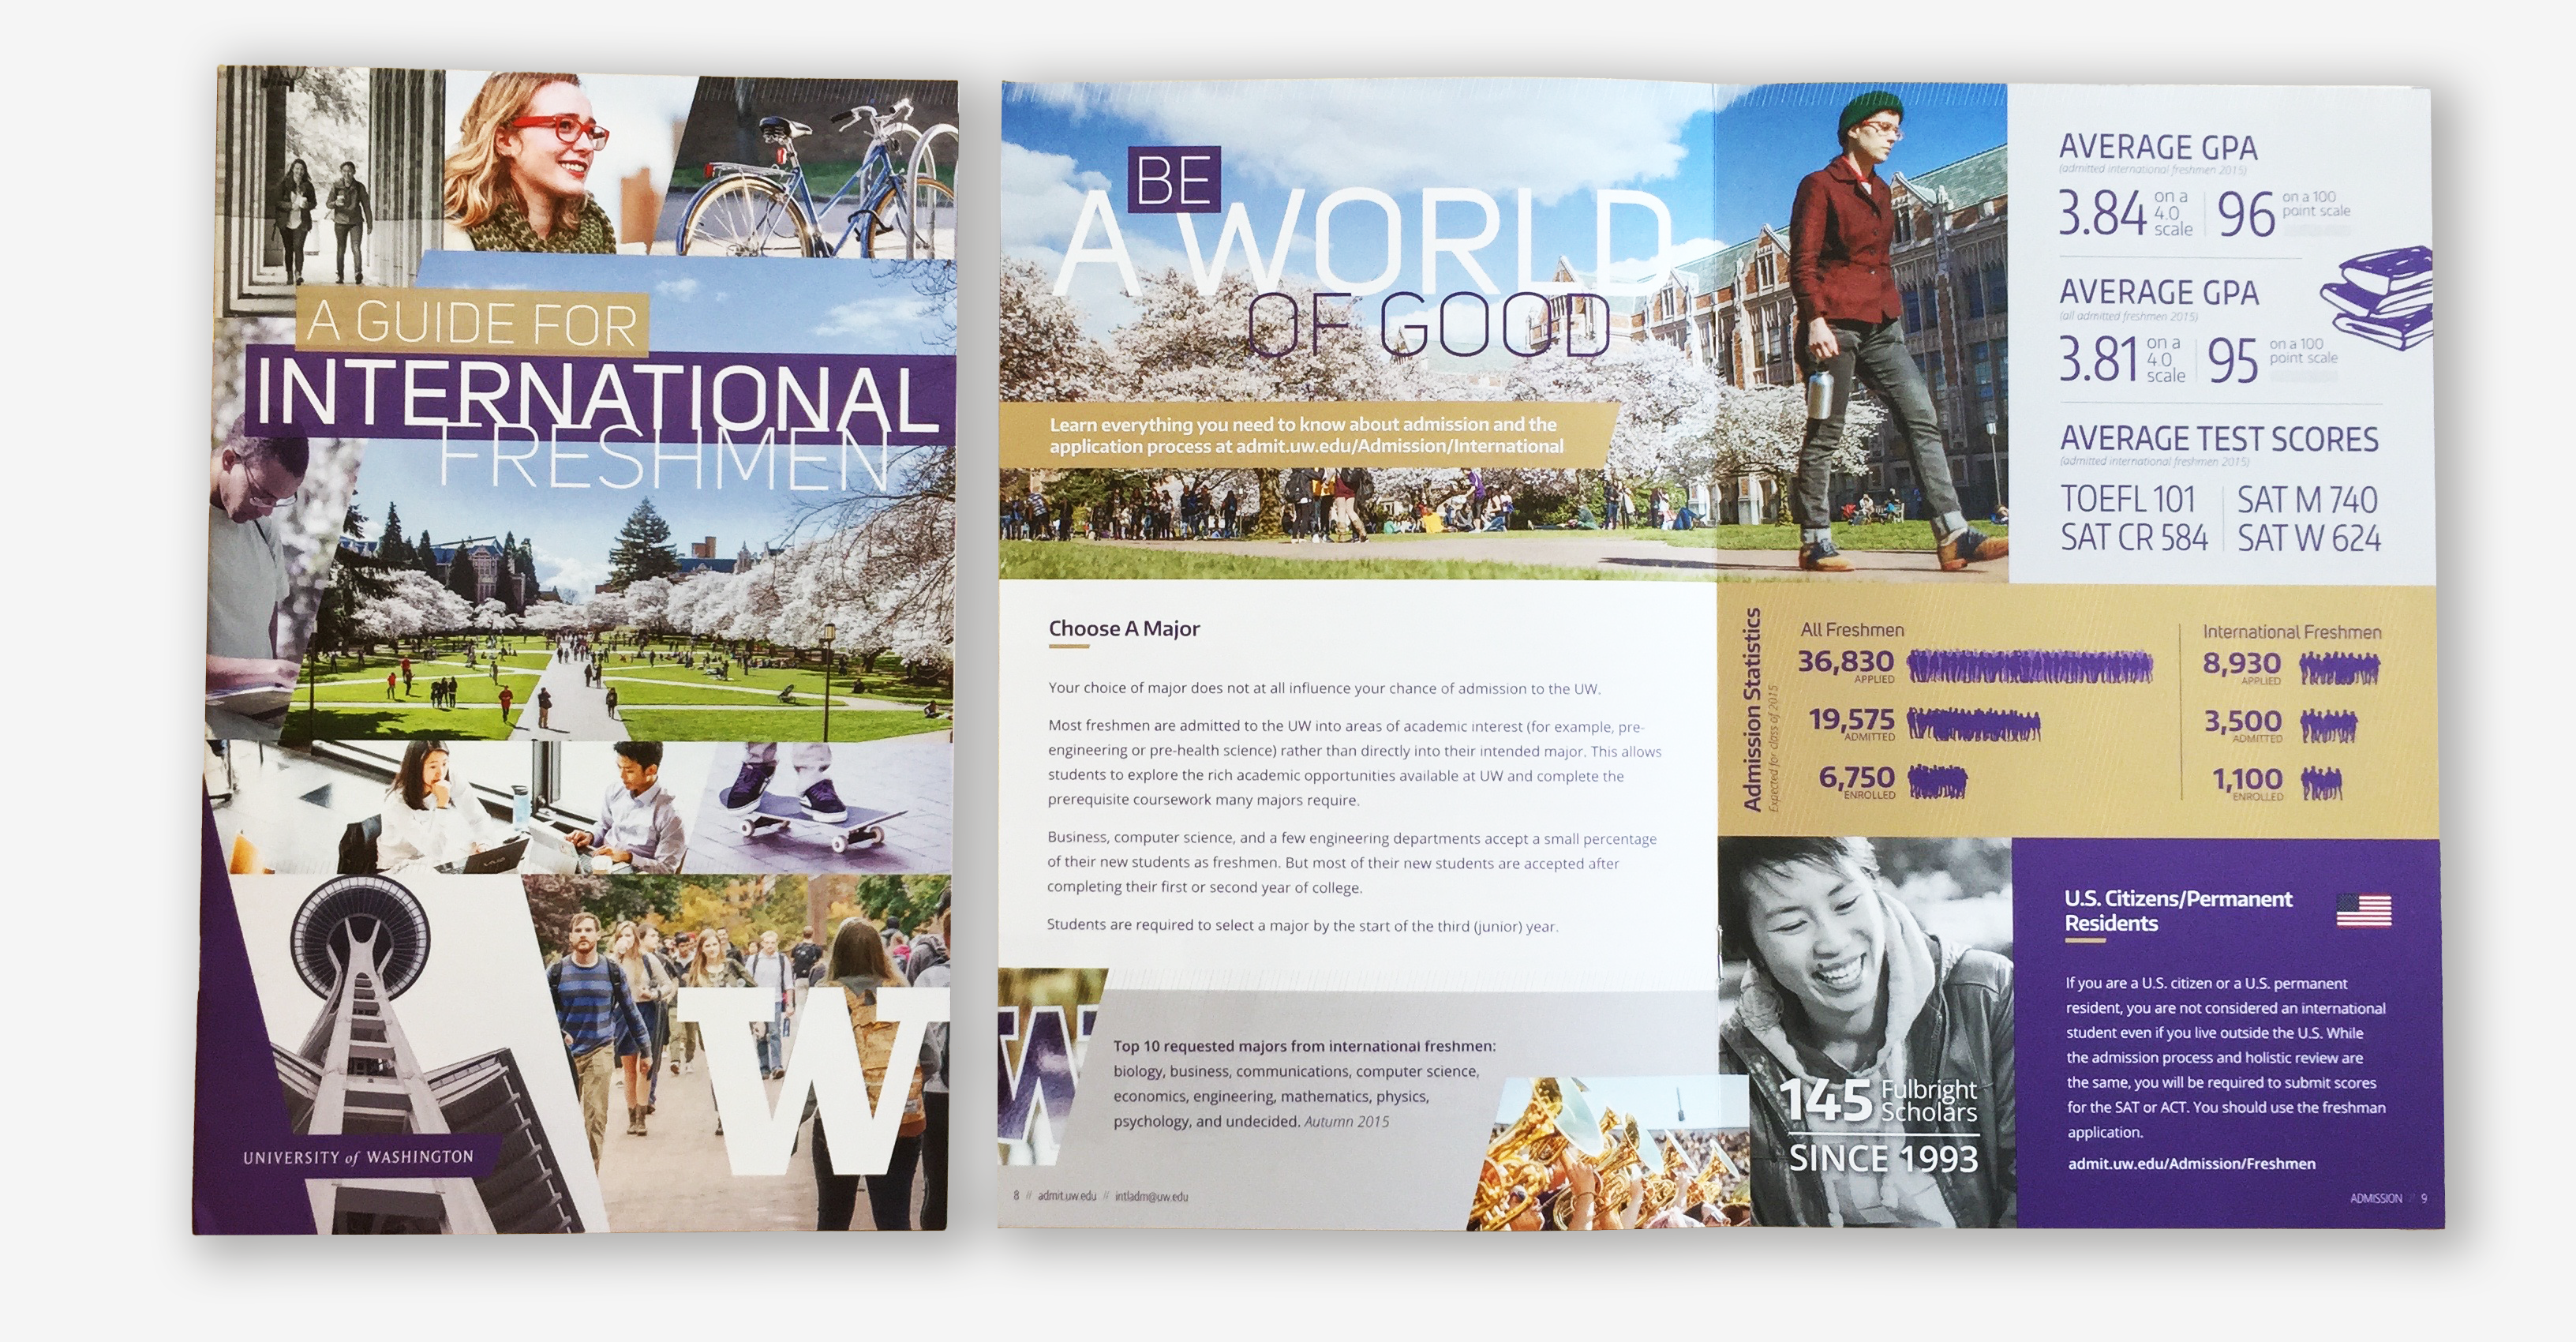 The UW Admissions promotional booklet